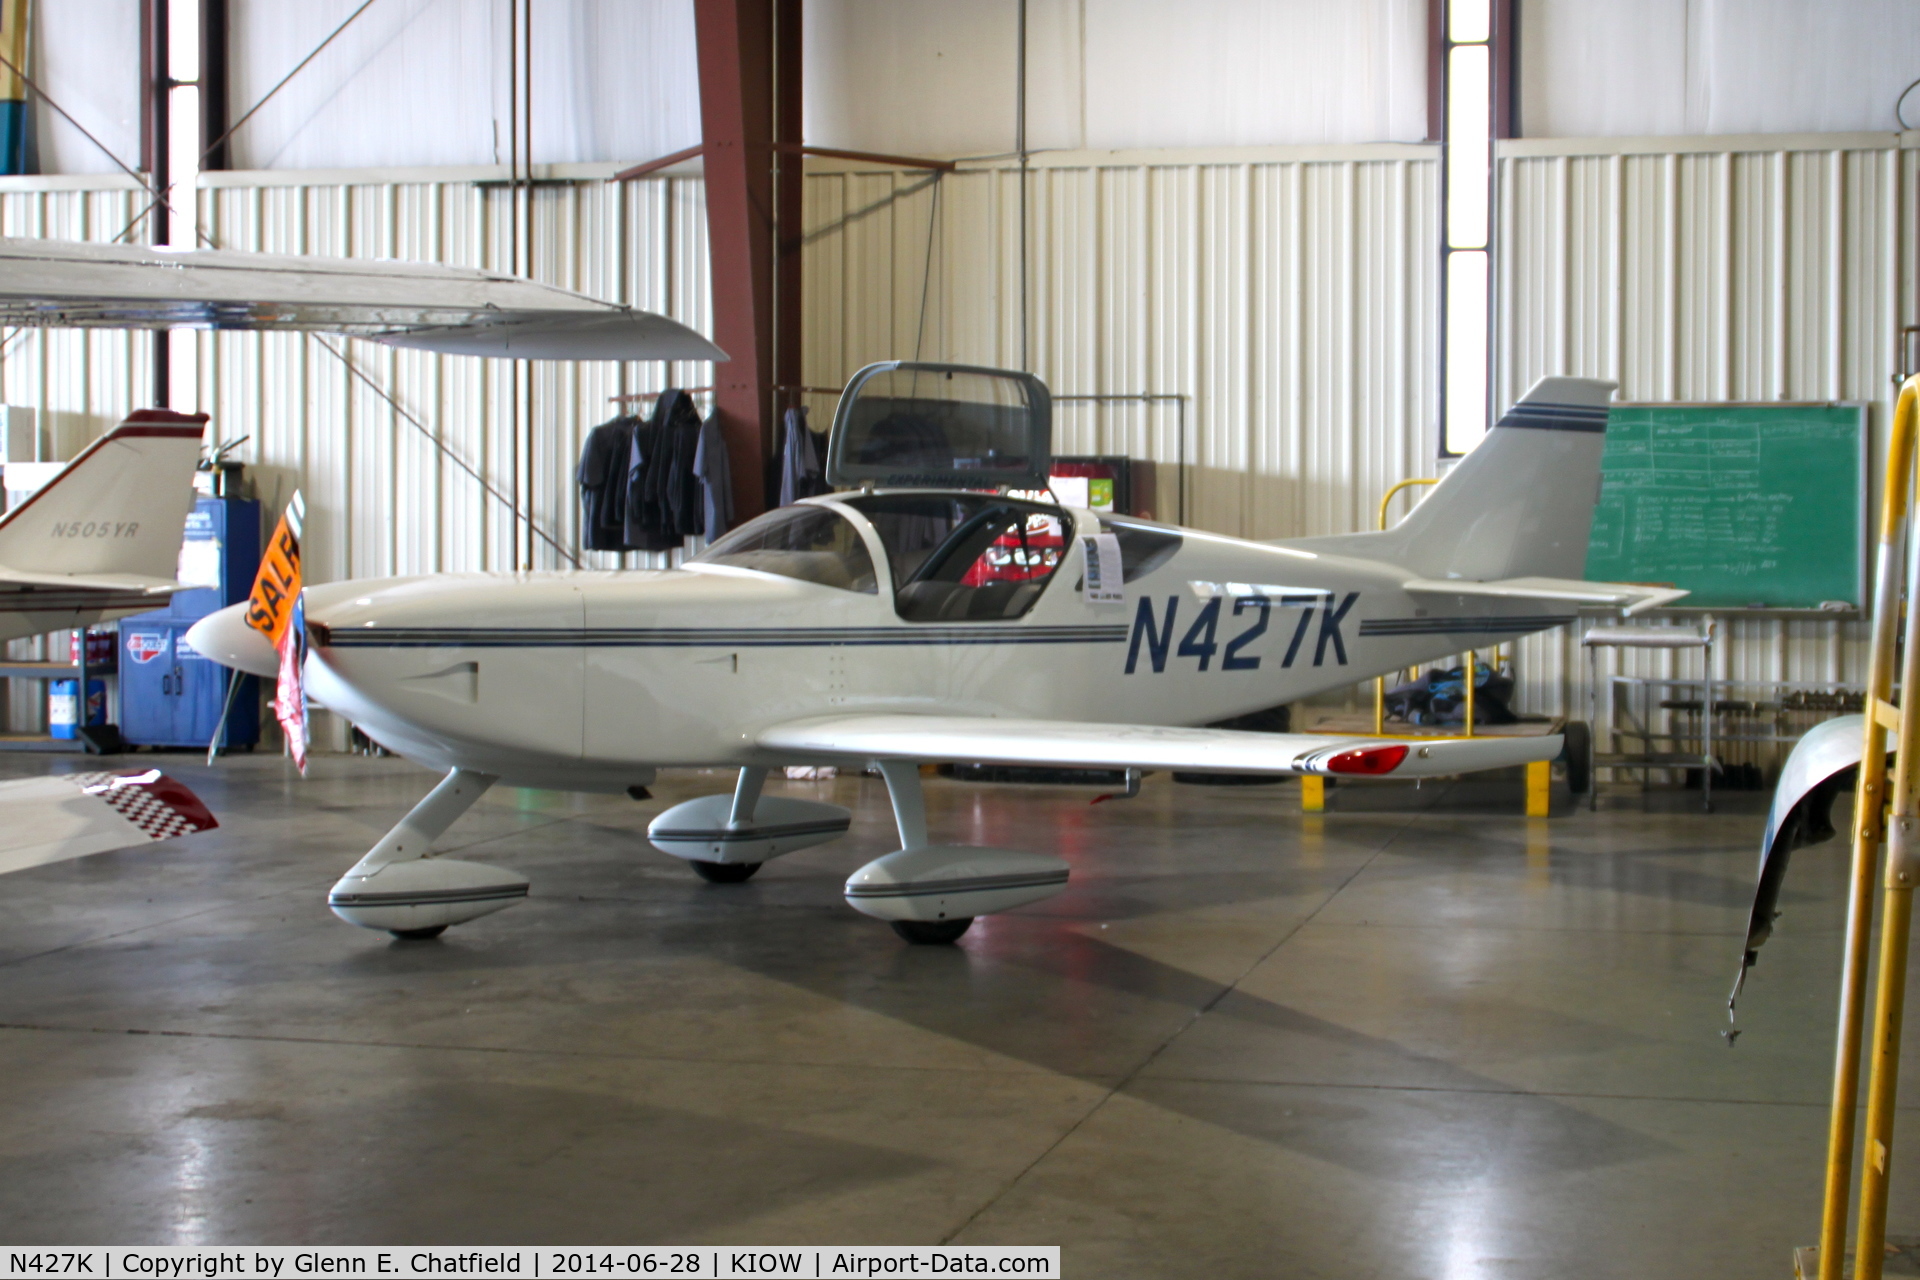 N427K, 1993 Stoddard-Hamilton Glasair II-S FT C/N 2112, Among aircraft displayed in a hangar during the air show